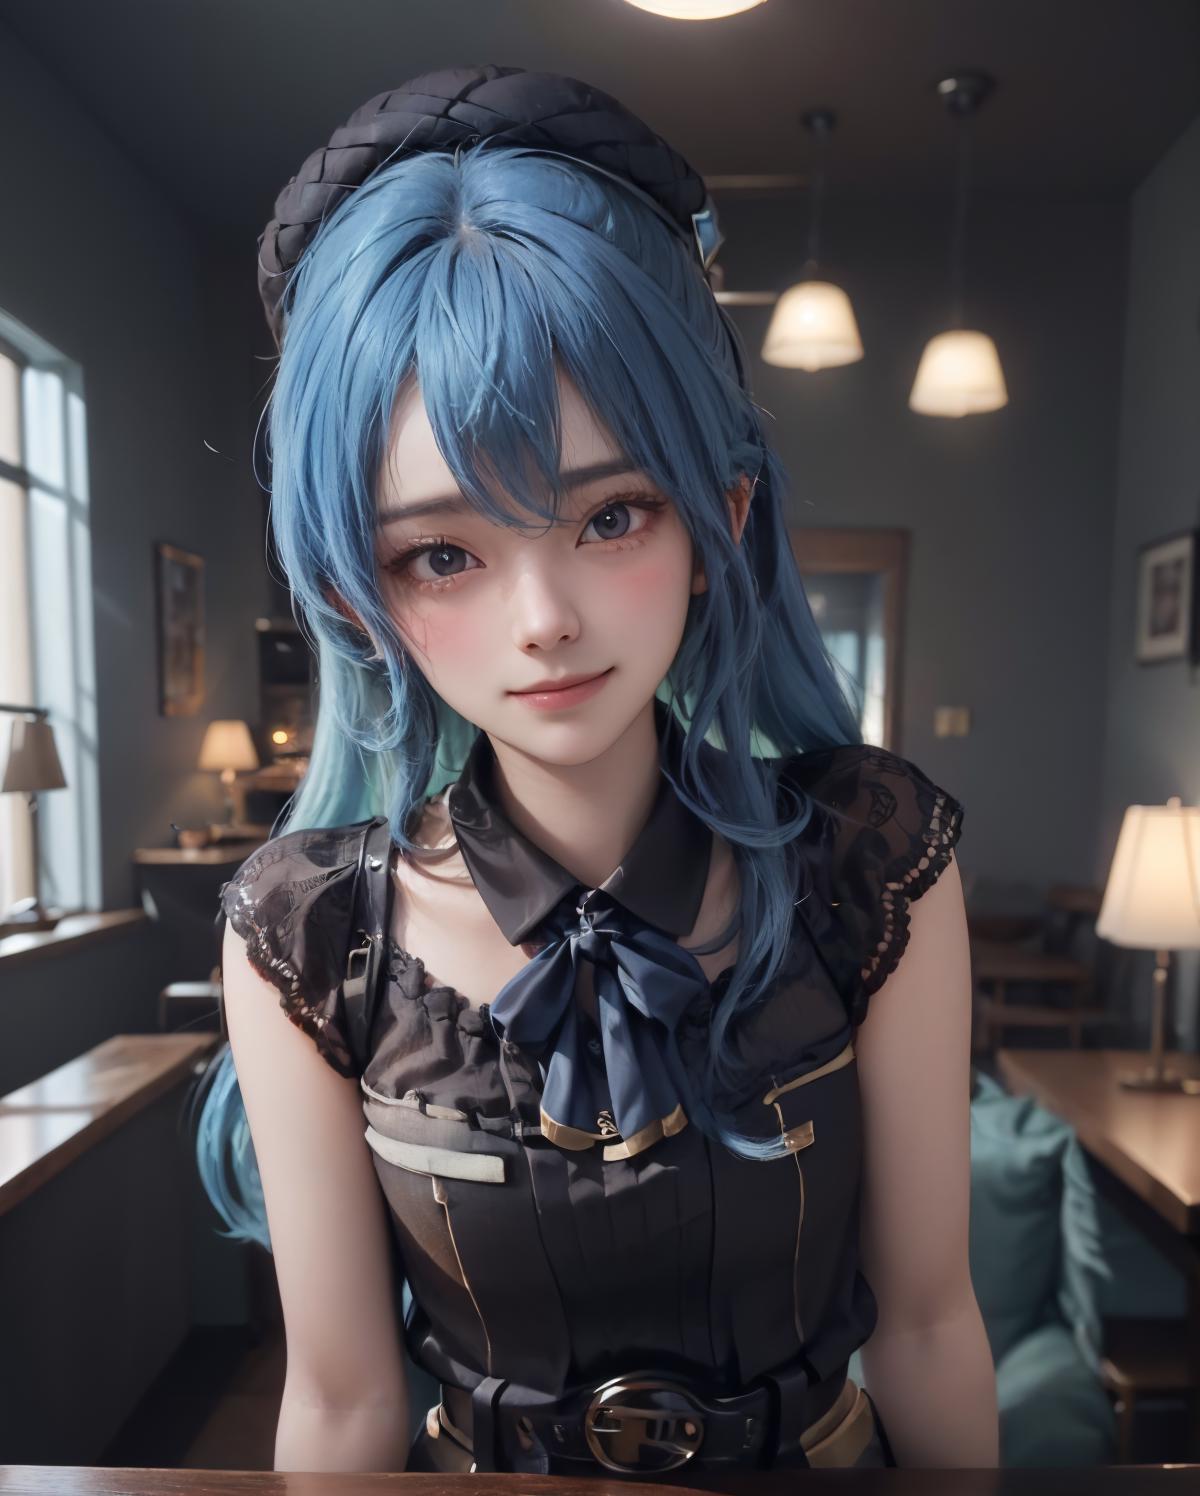 AI model image by aigirl951877